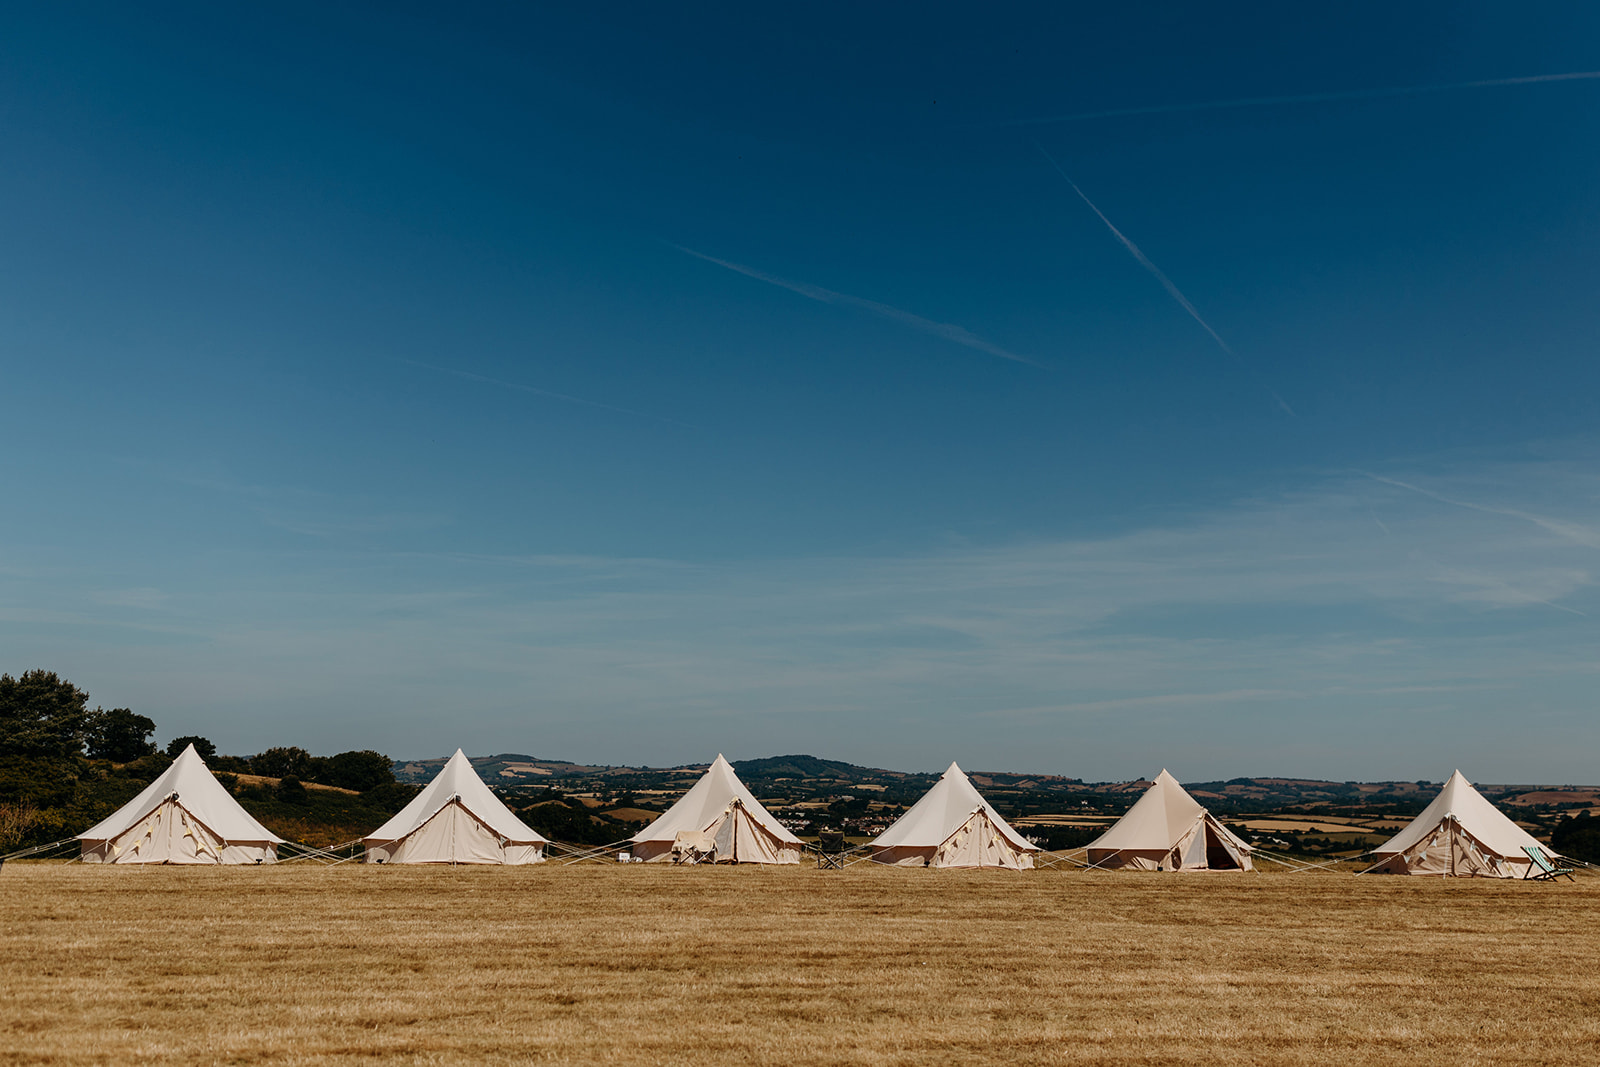 Bell tents for Dorset wedding with deep blue sky in background